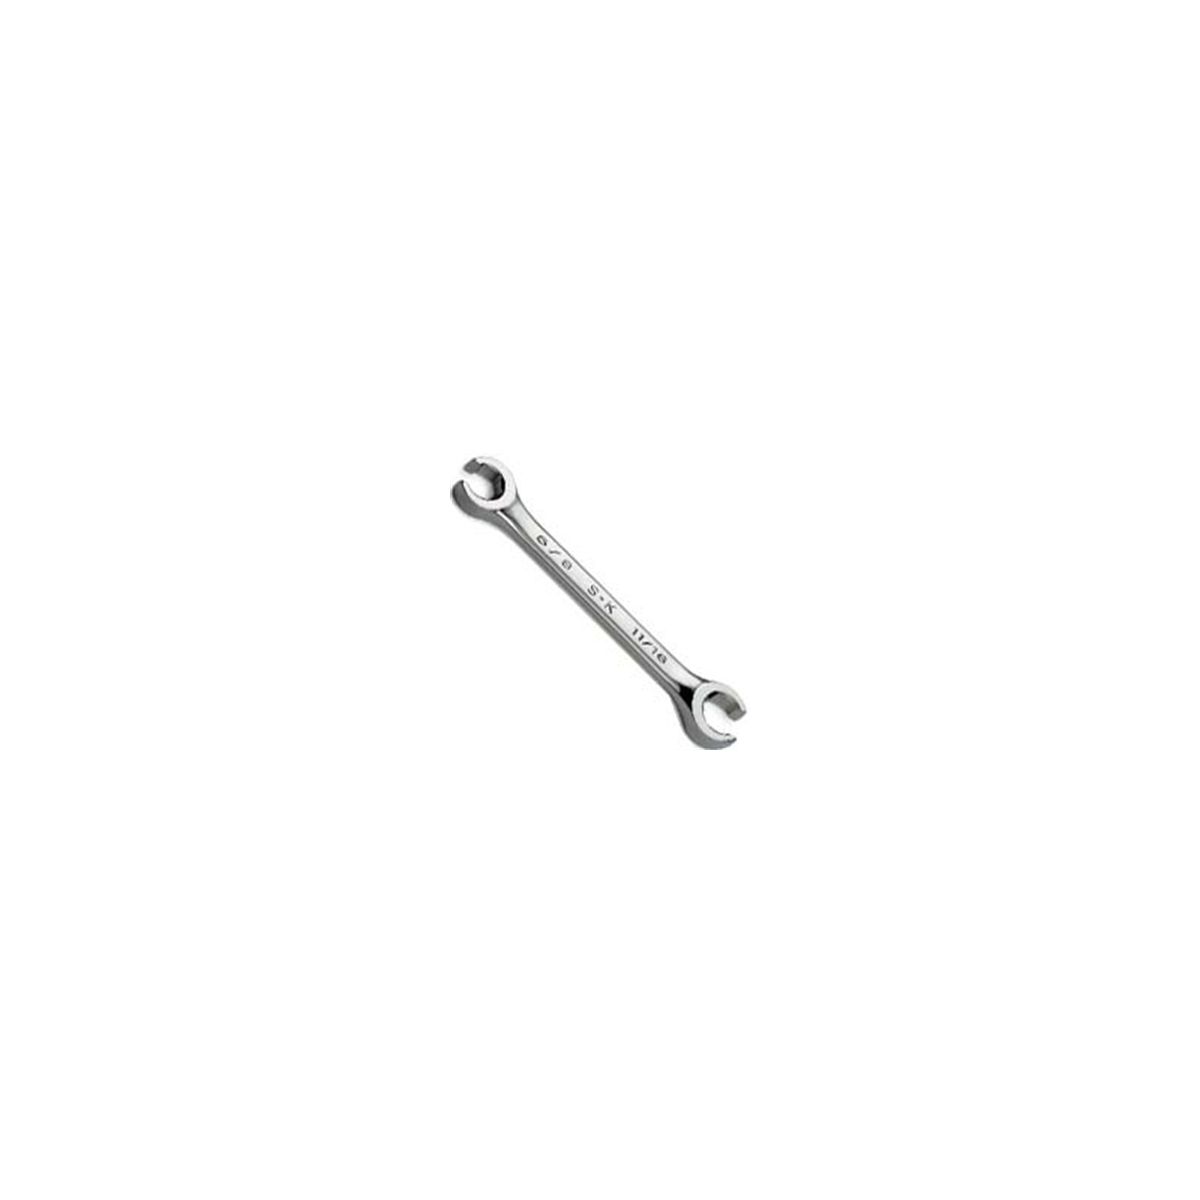 SuperKrome(R) Metric Flare Nut Wrench - 15mm x 17mm